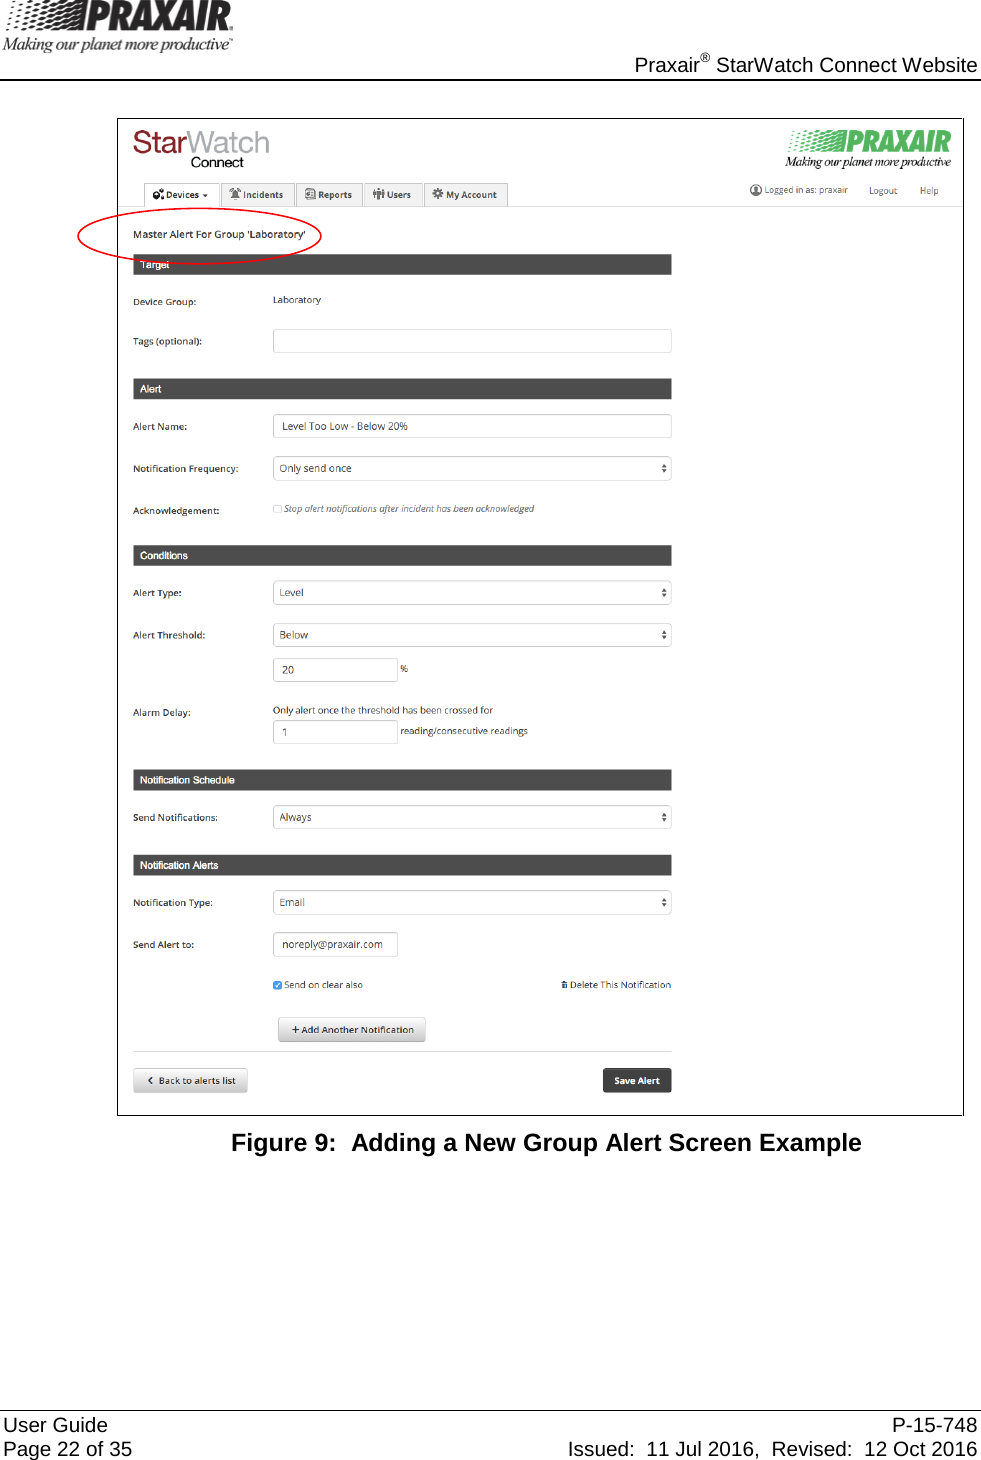    Praxair® StarWatch Connect Website User Guide  P-15-748 Page 22 of 35 Issued:  11 Jul 2016,  Revised:  12 Oct 2016   Figure 9:  Adding a New Group Alert Screen Example     